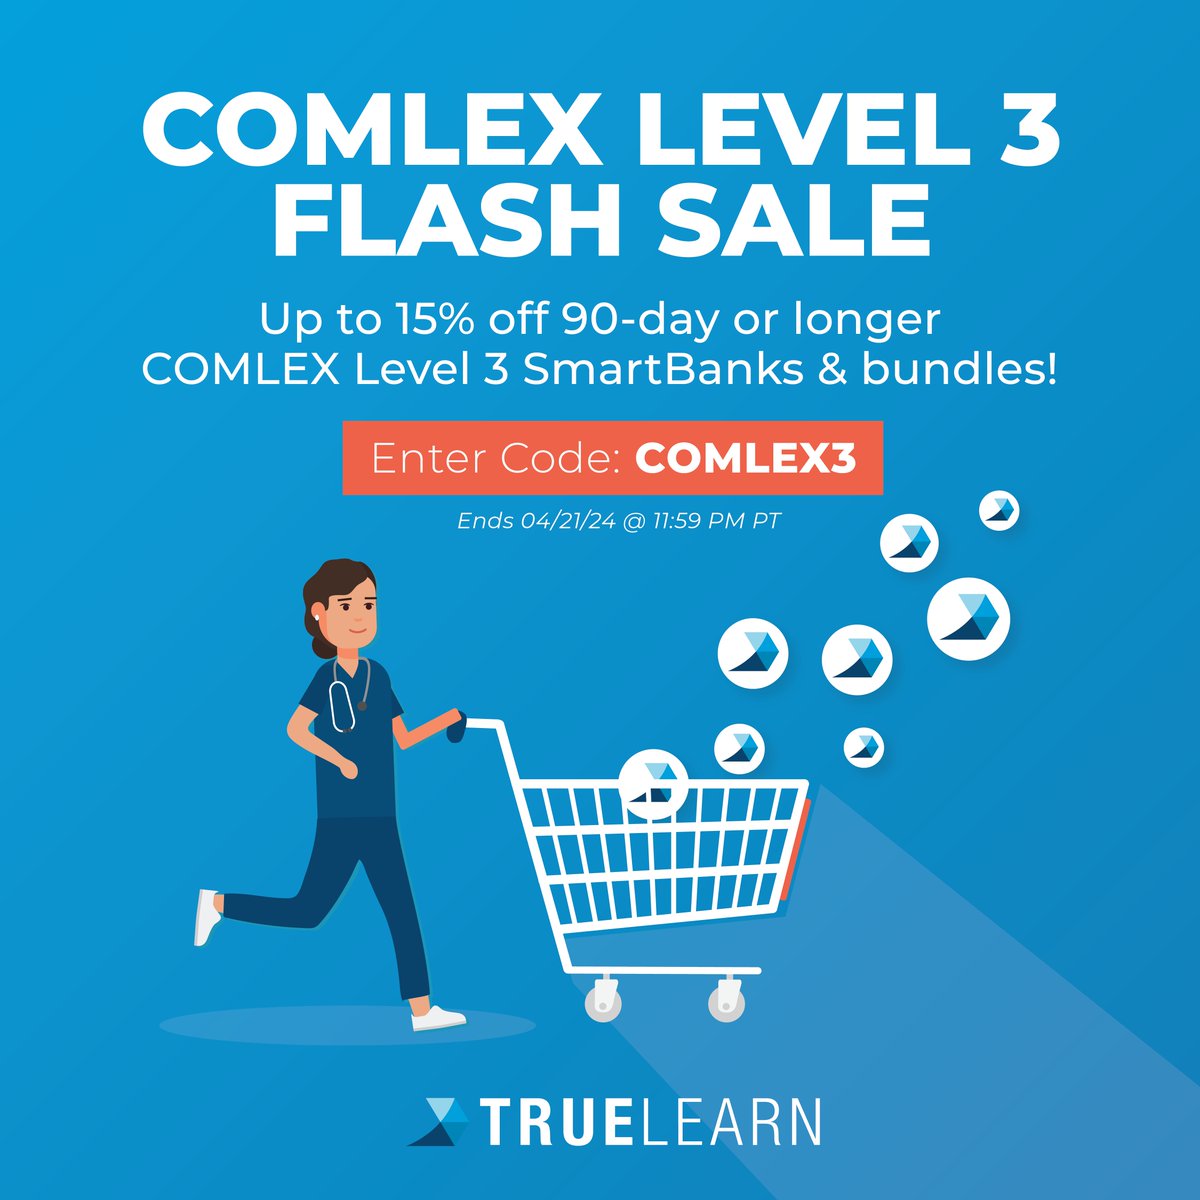 Master COMLEX Level 3 With Practice That Mimics The Real NBOME Exam Experience!

Level 3 FLASH SALE!

➡️15% Off 180-Day or Longer Bundles
➡️10% Off 90-Day Bundles

Use Code: COMLEX3

Ends April 21, 2024, at 11:59 PM PT.

#comlex #comlexlevel3 #sale #healthcare #healthcarestudent